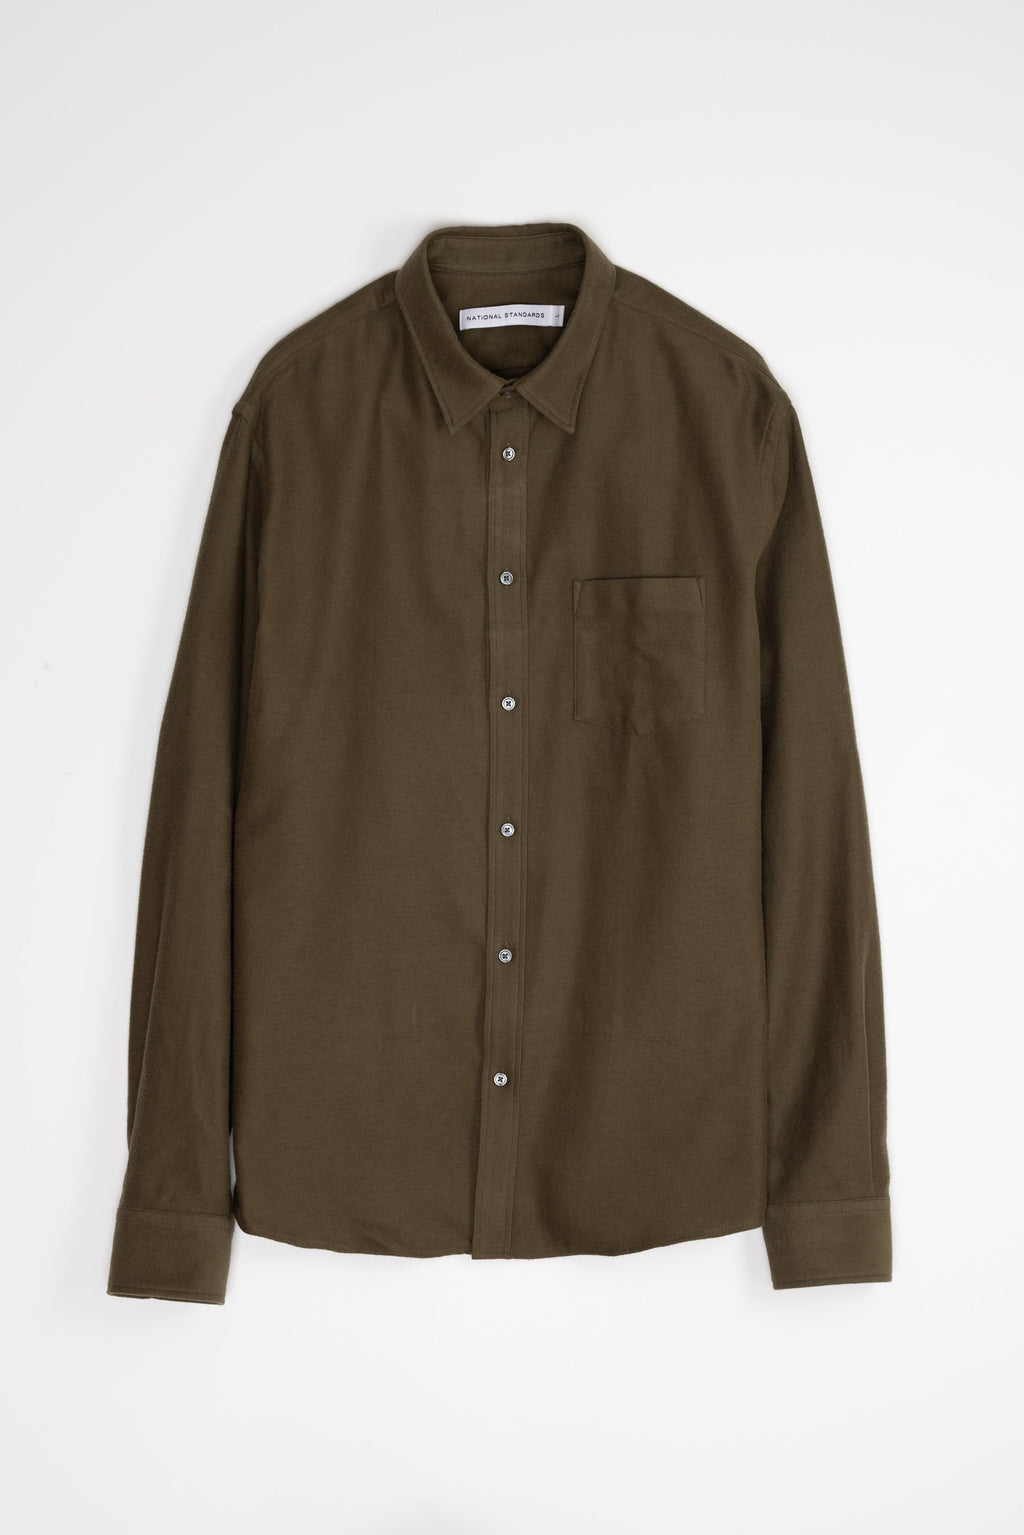 Japanese Flannel in Army Green 01